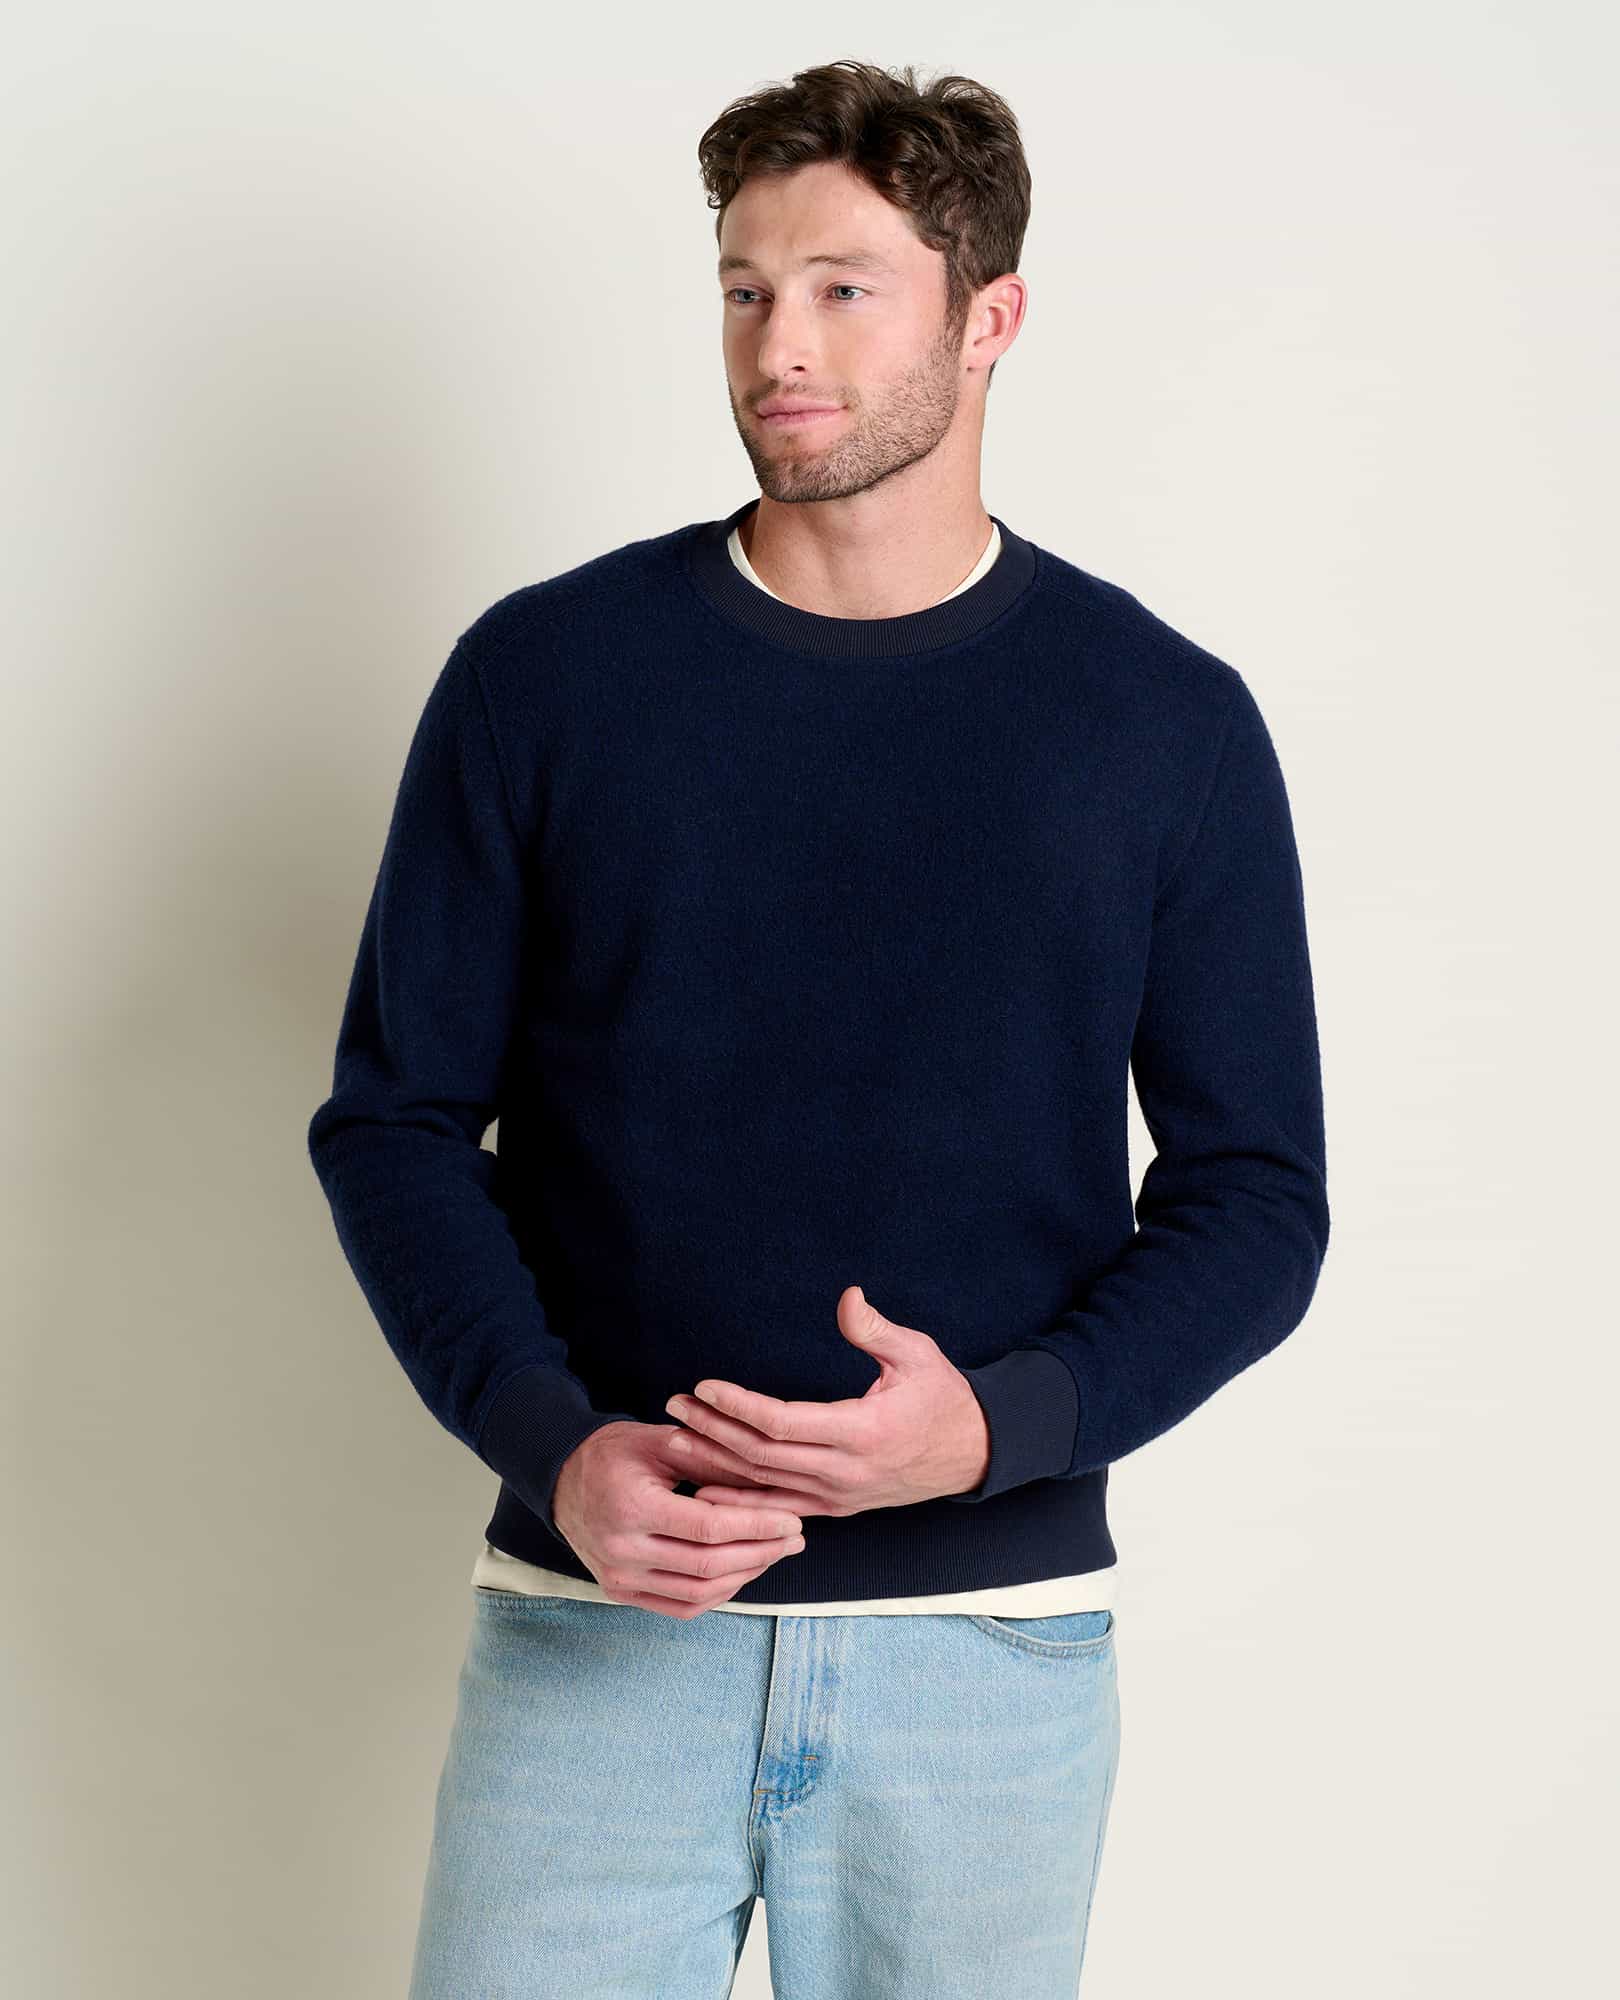 Kennicott Crew  Recycled Wool Blend Sweater by Toad&Co